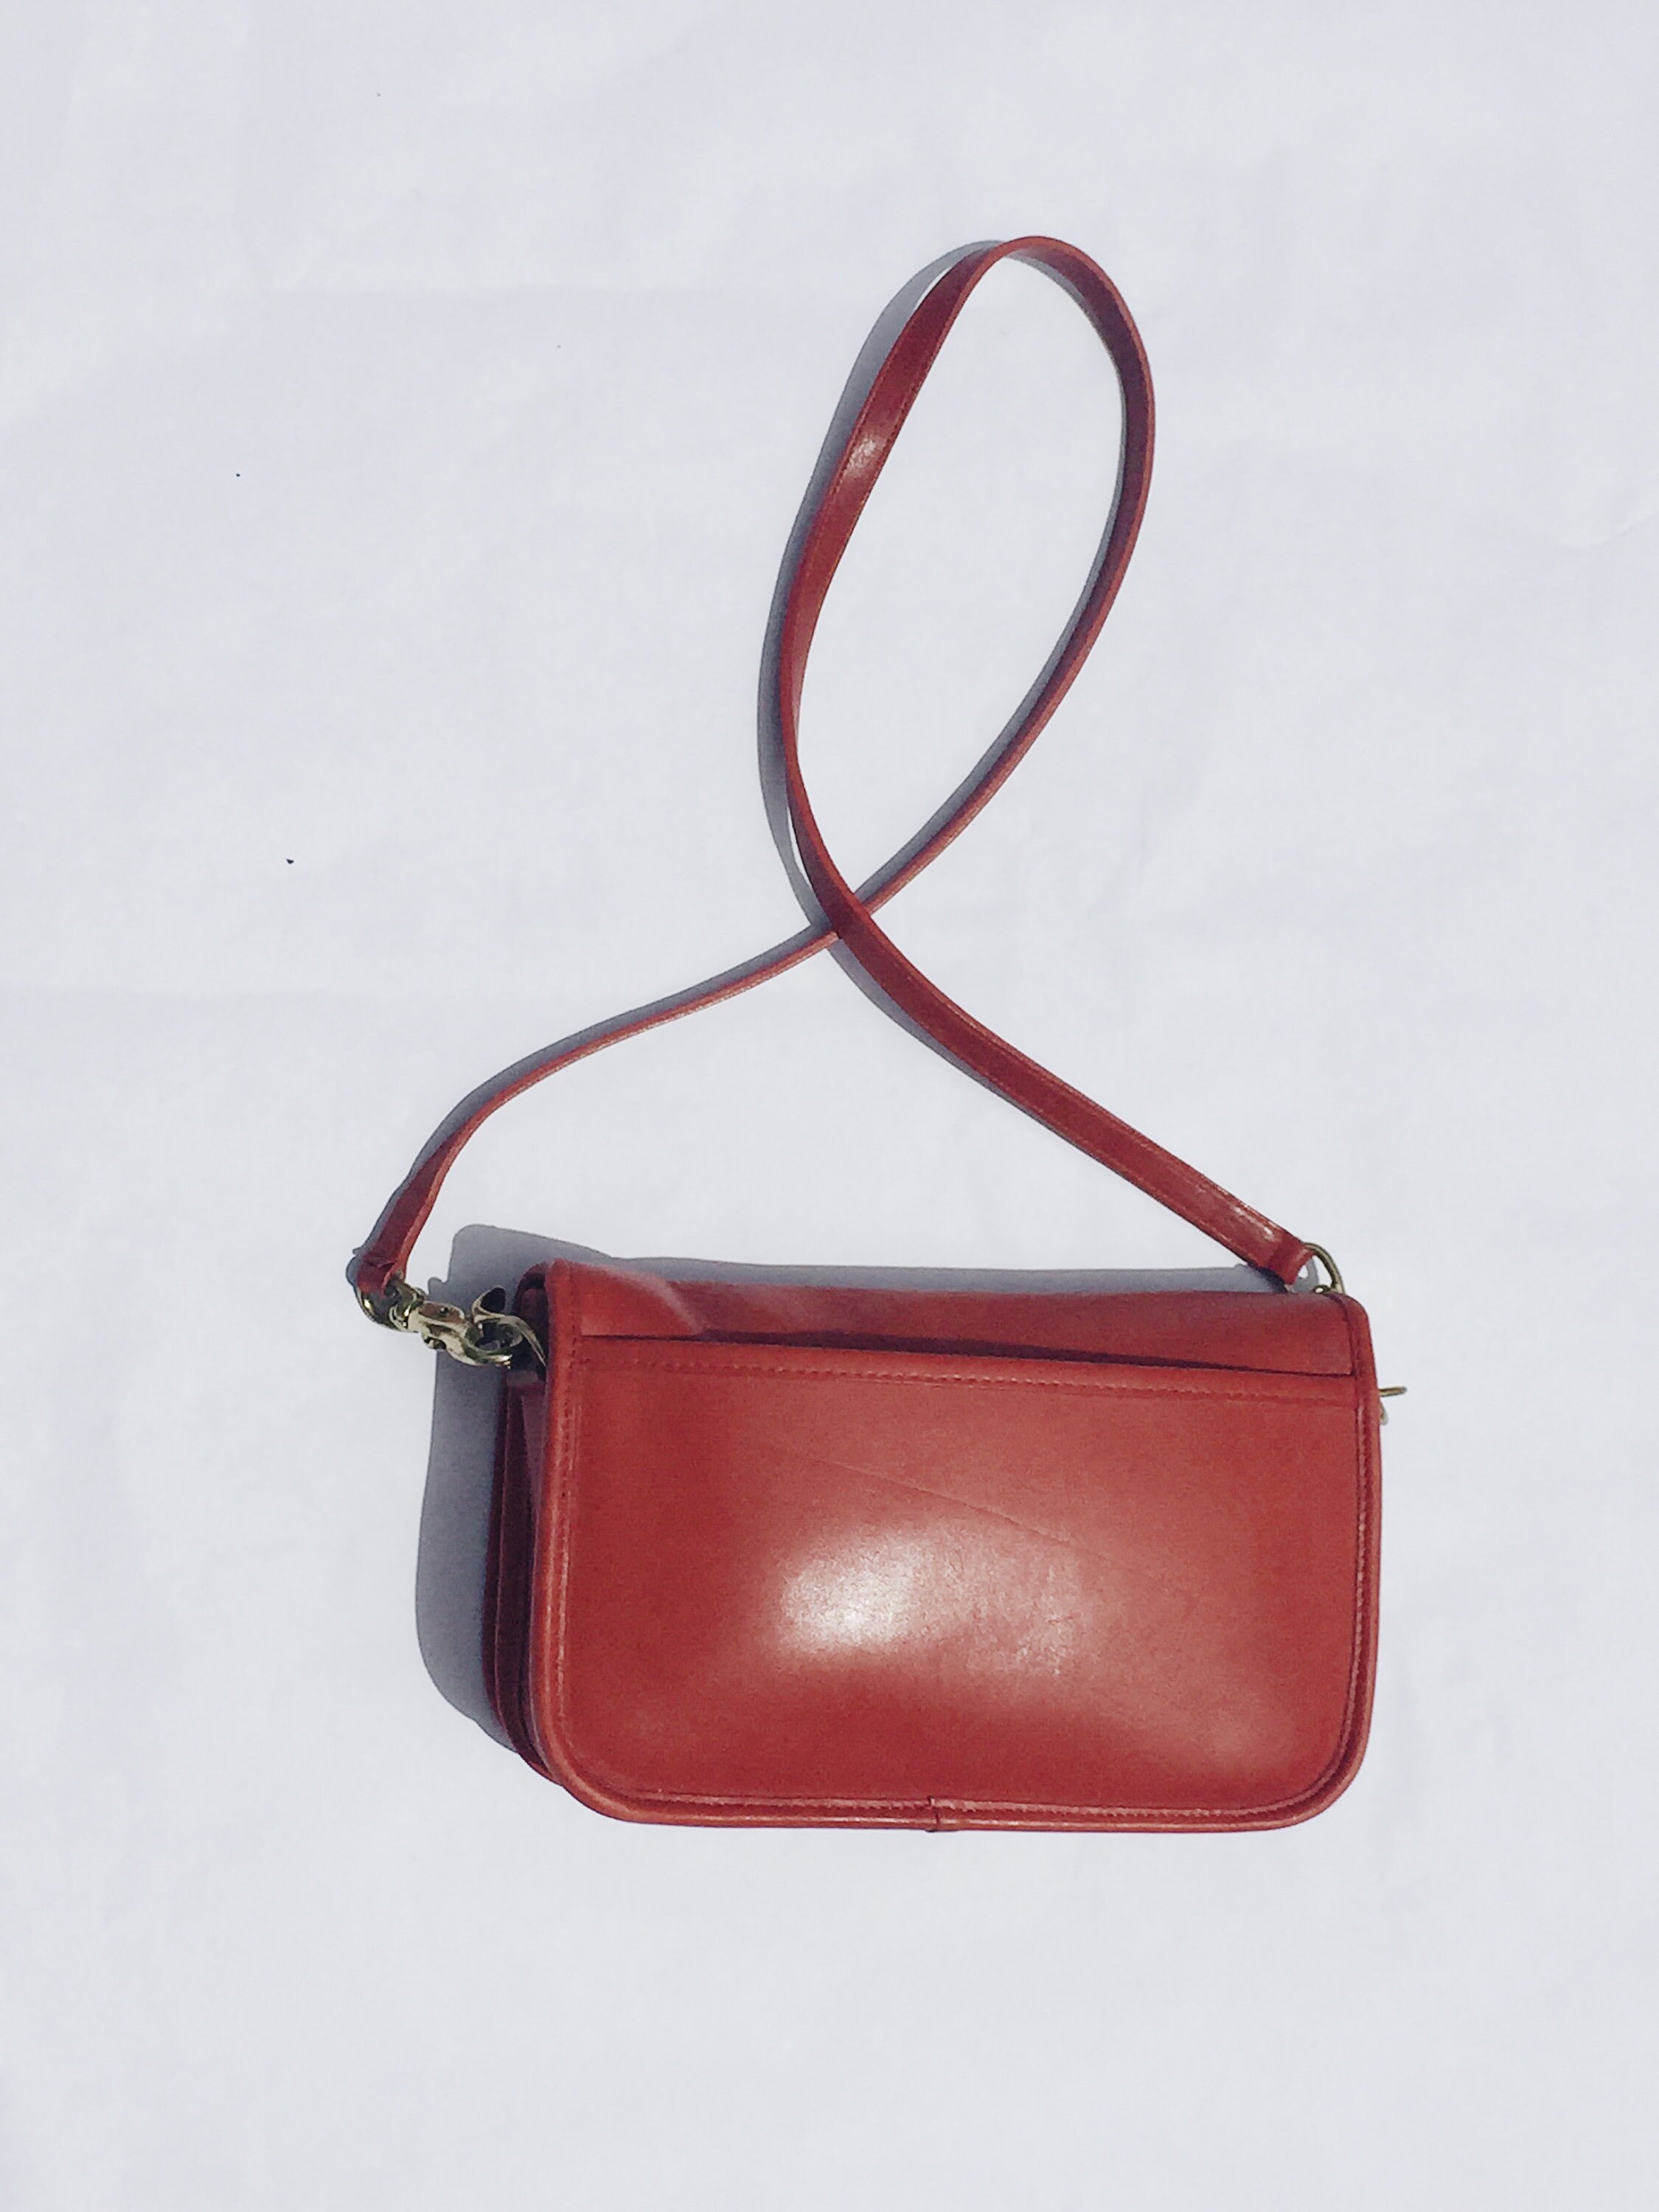 Vintage Red Coach Handbag - Never Liked It Anyway